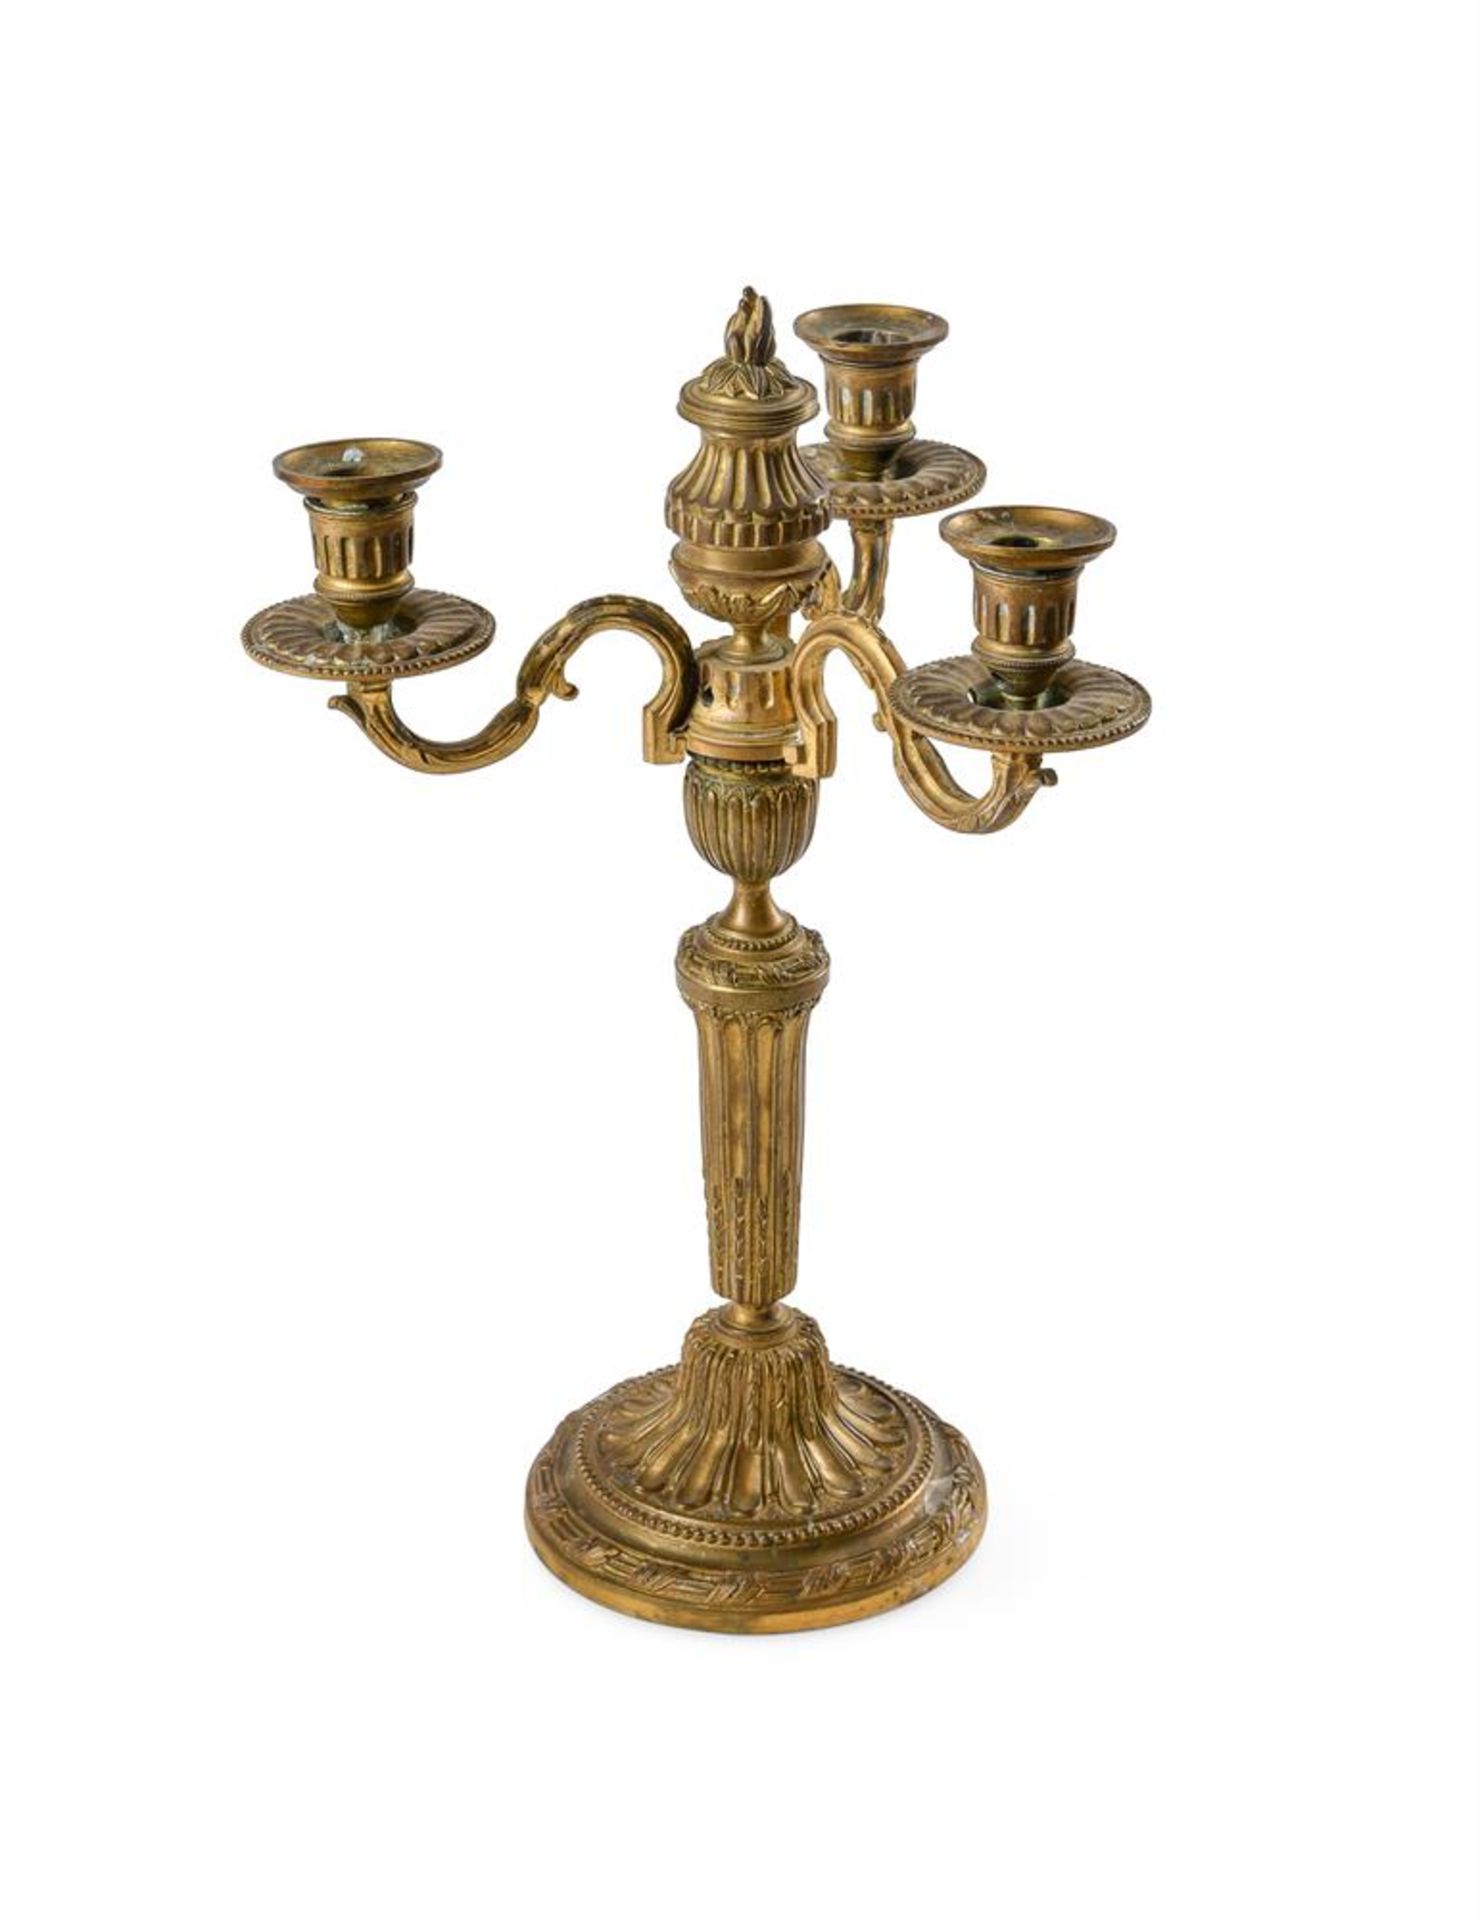 A PAIR OF FRENCH GILT BRONZE THREE LIGHT CANDLESTICKS, 18TH CENTURY AND LATER - Image 2 of 2